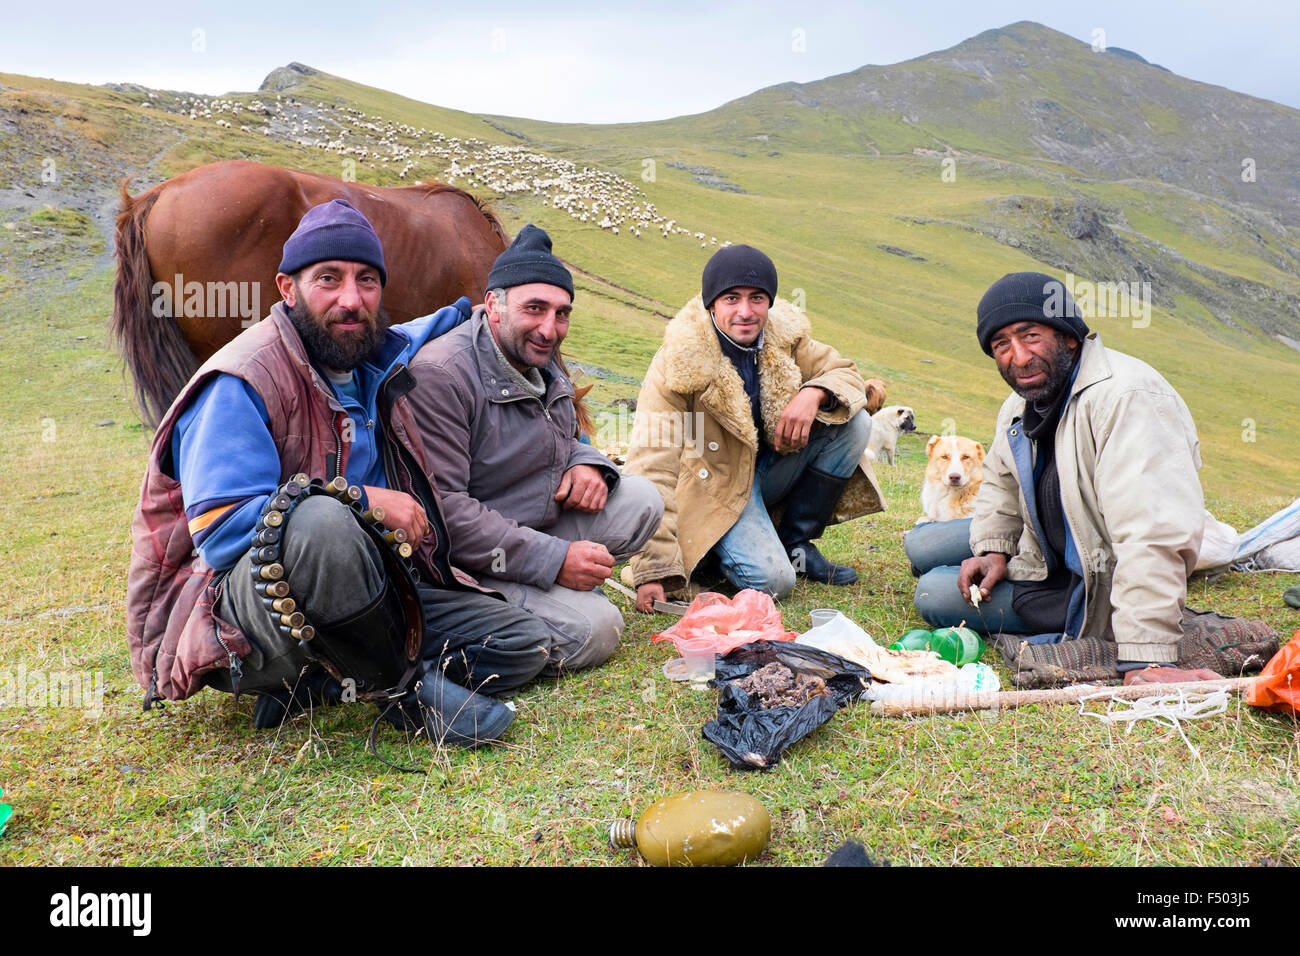 This picture shows four high pasture shepherds eating together. Stock Photo